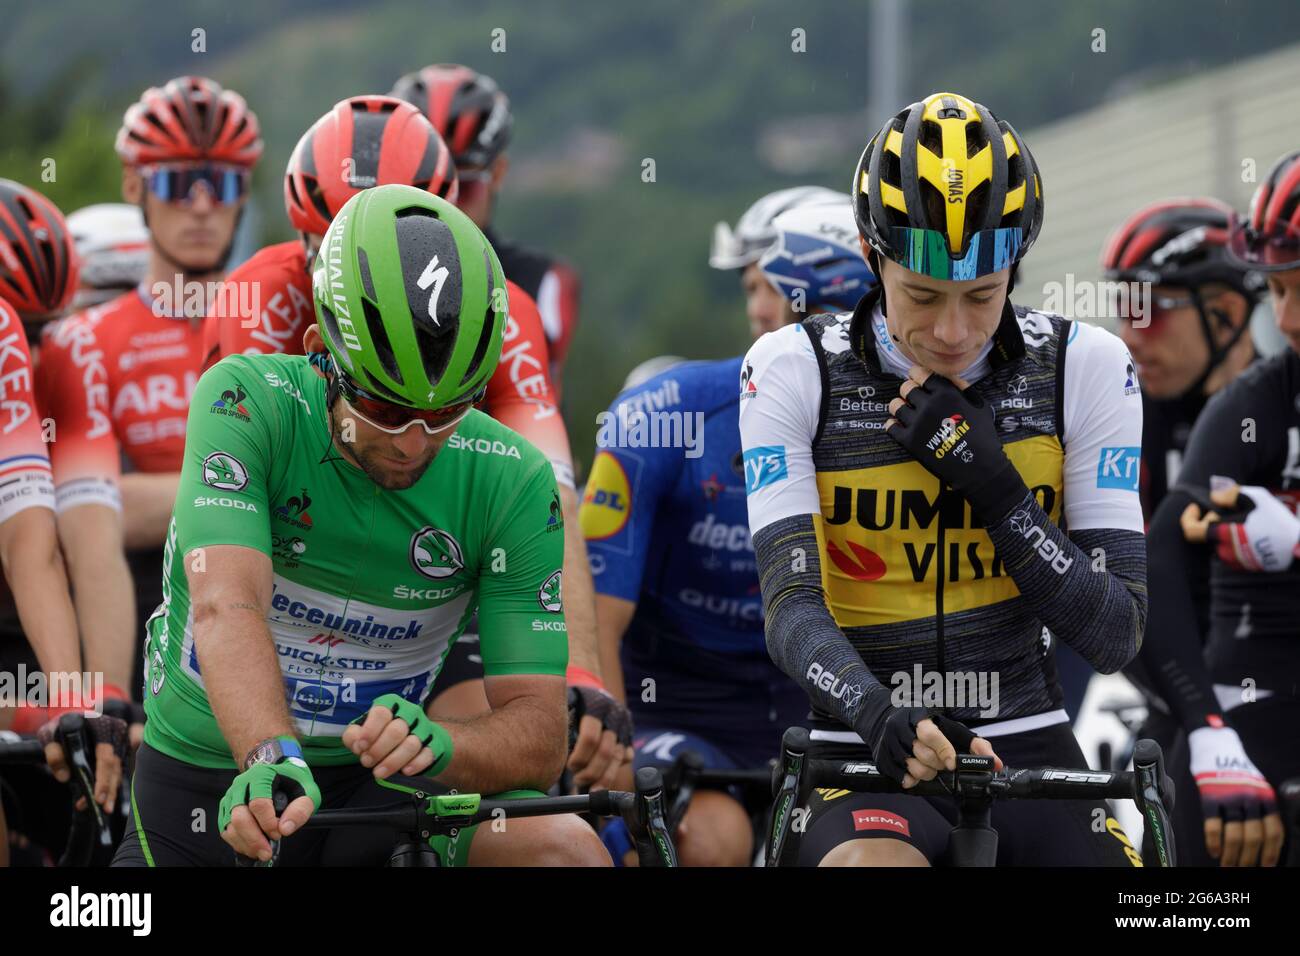 Cluses, France. 04 July 2021. Mark Cavendish at the start of Stage 9 of the Tour de France in Cluses. Julian Elliott News Photography Credit: Julian Elliott/Alamy Live News Stock Photo